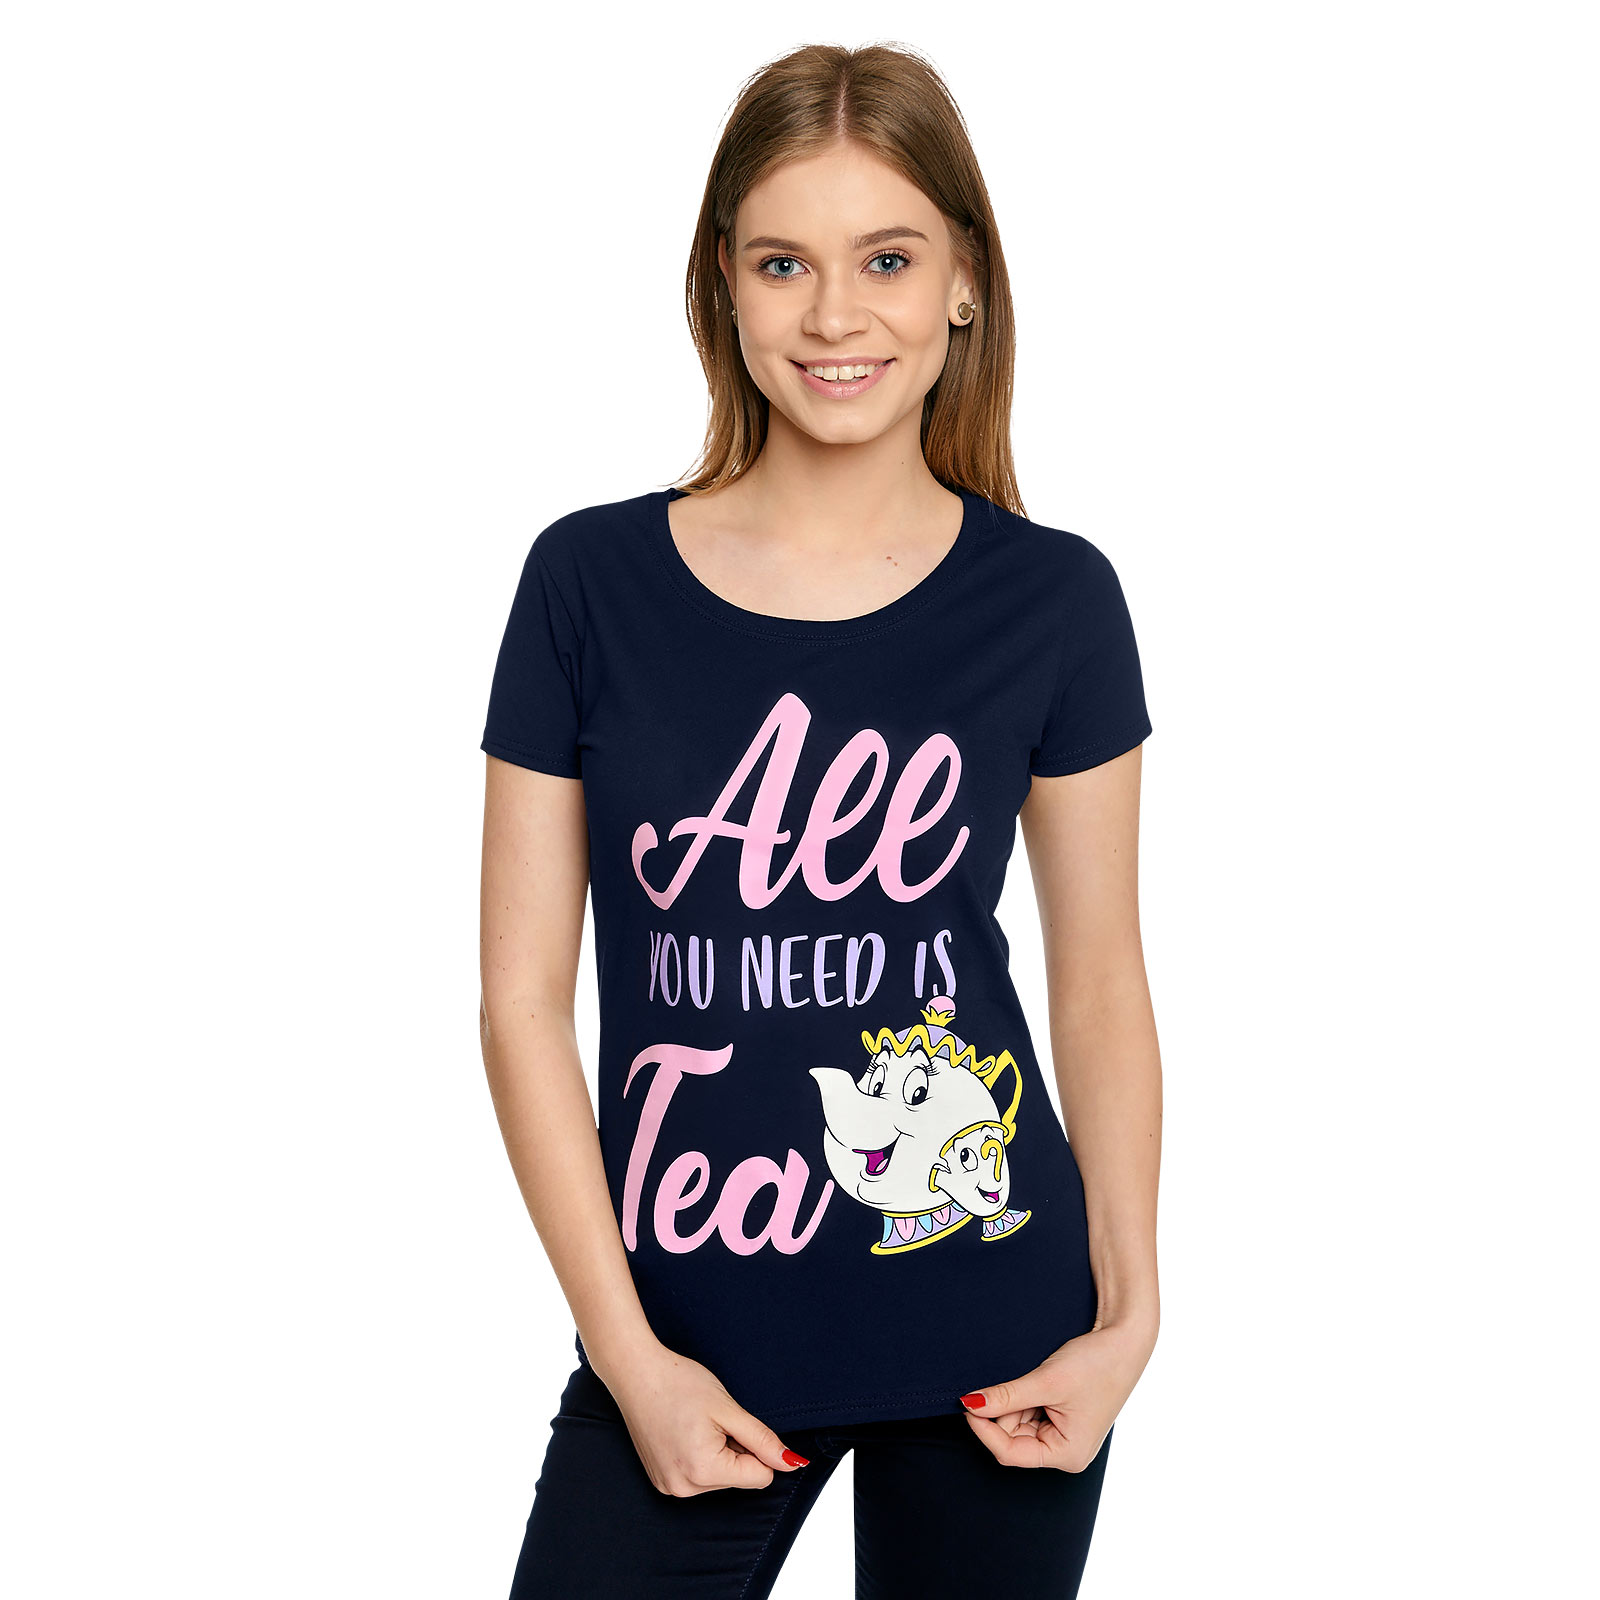 Beauty and the Beast - All You Need Is Tea Women's T-Shirt Blue